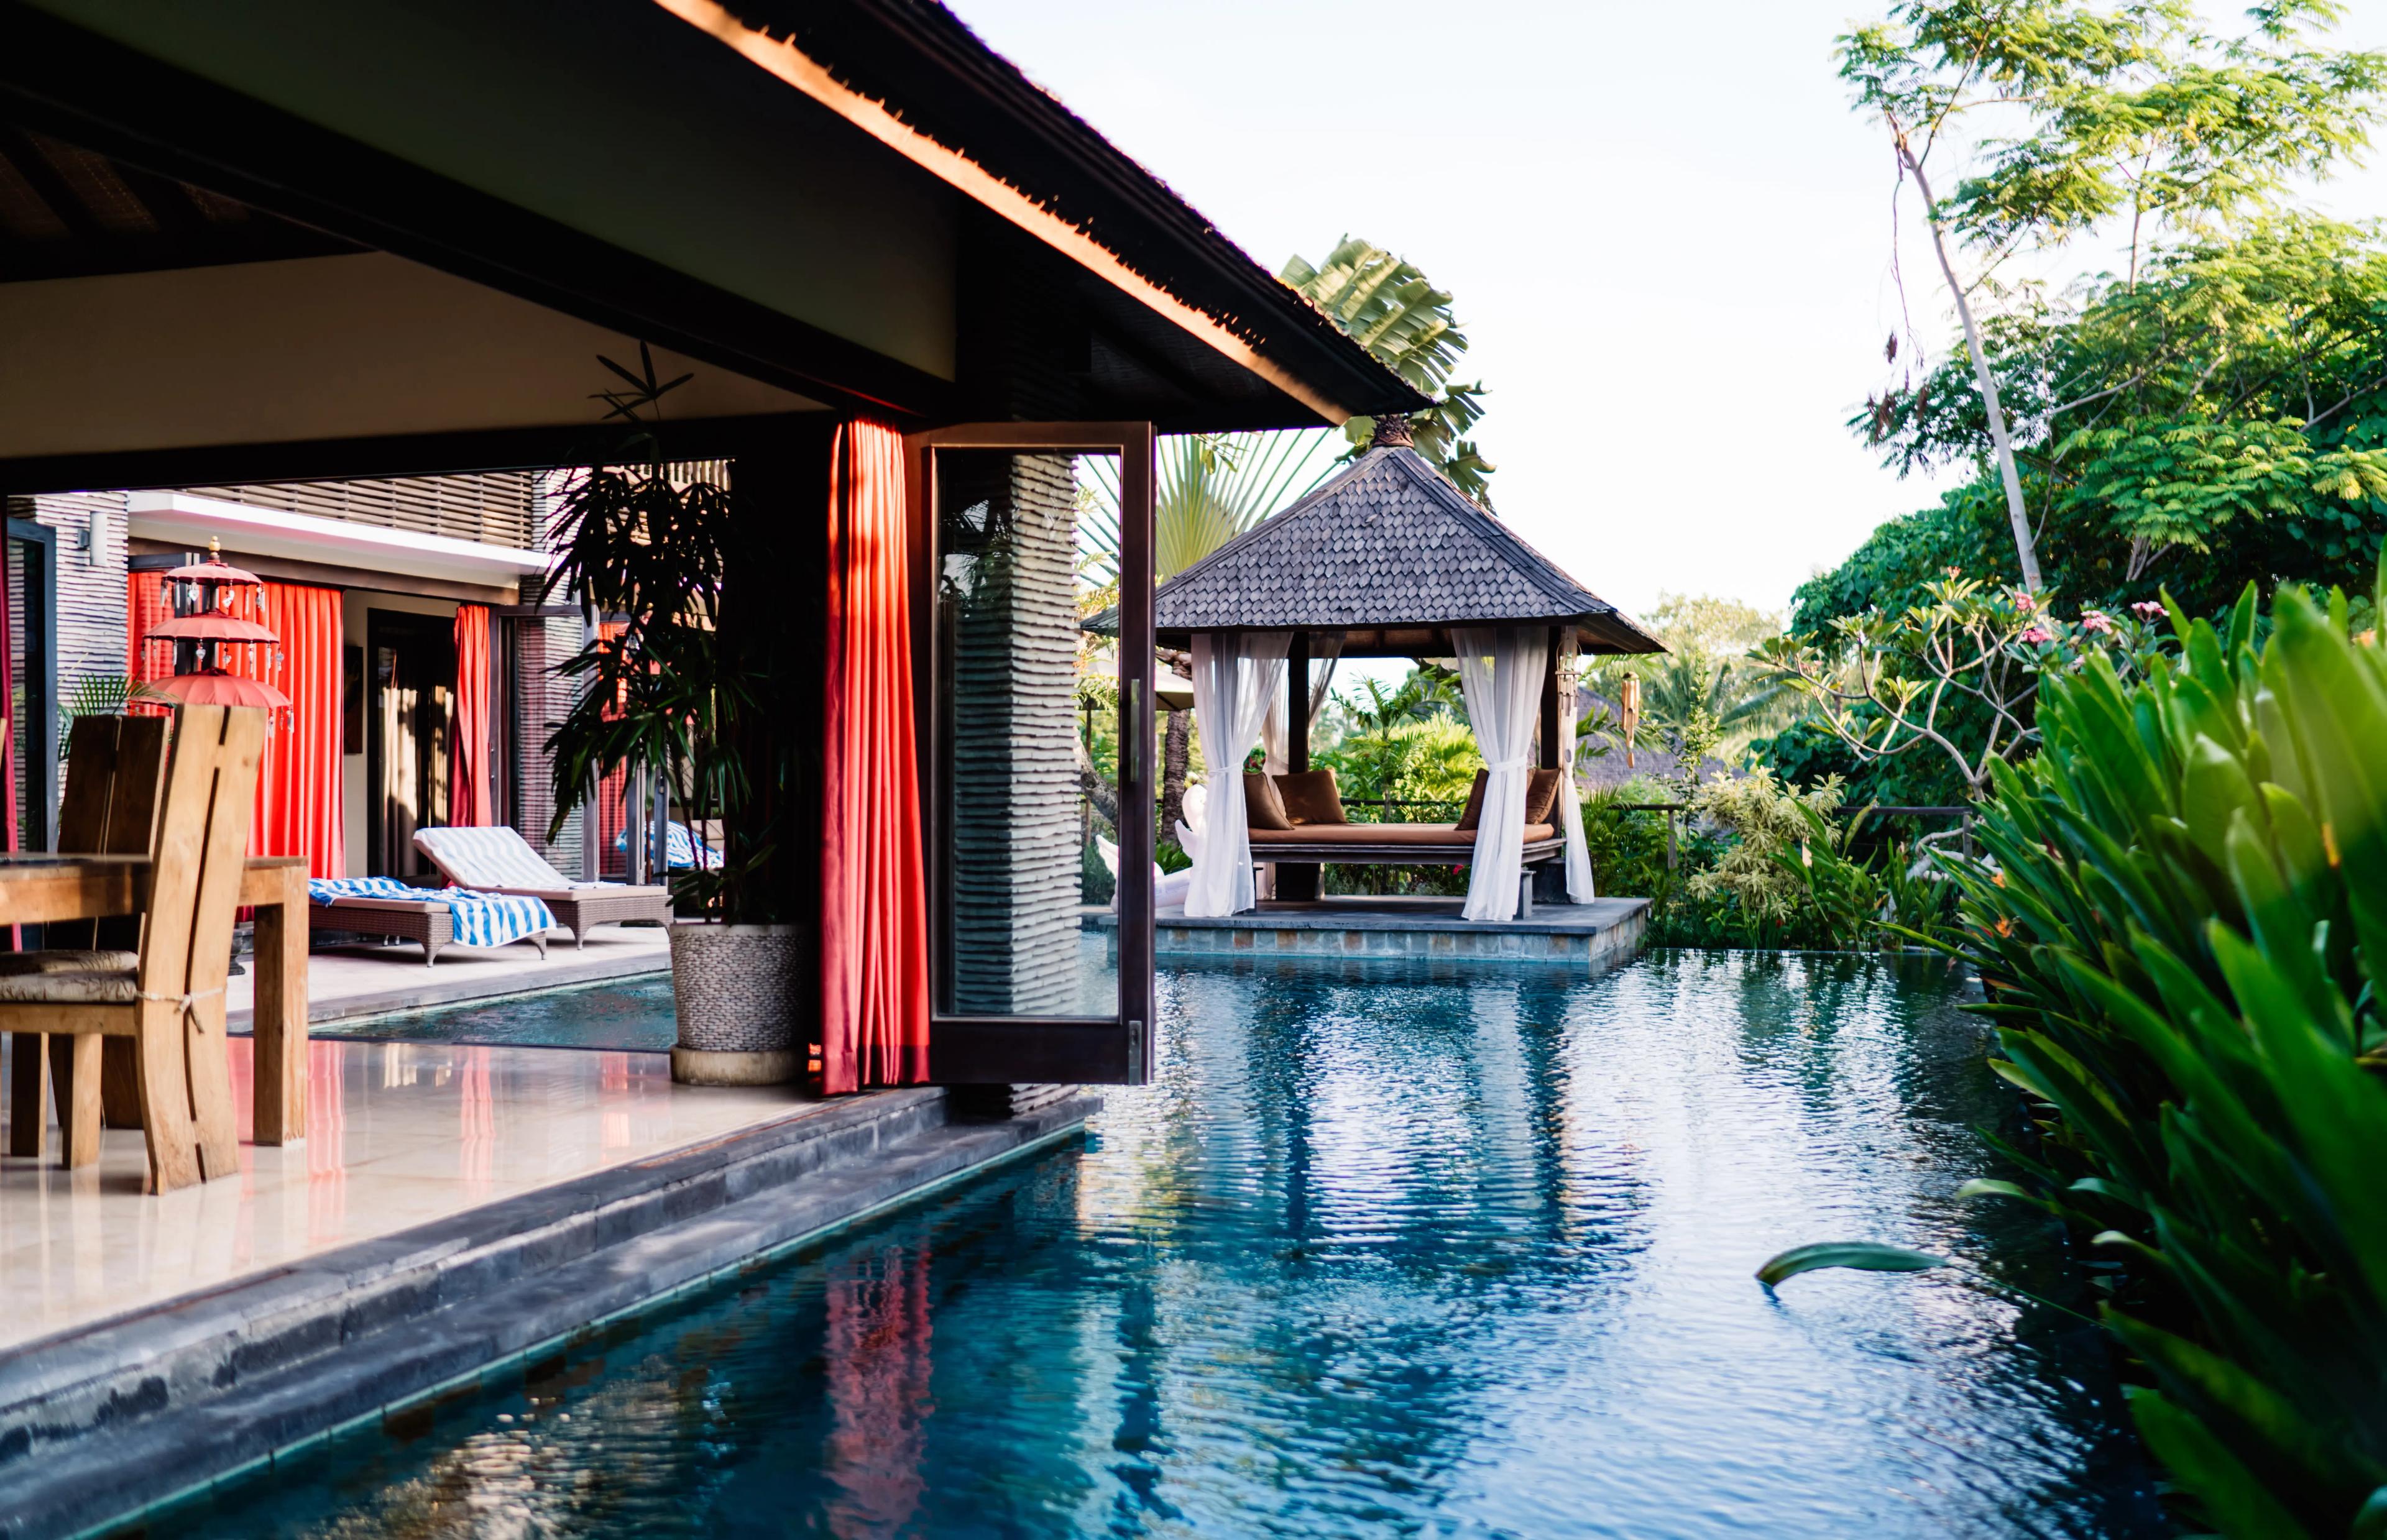 bali real estate investment mistakes